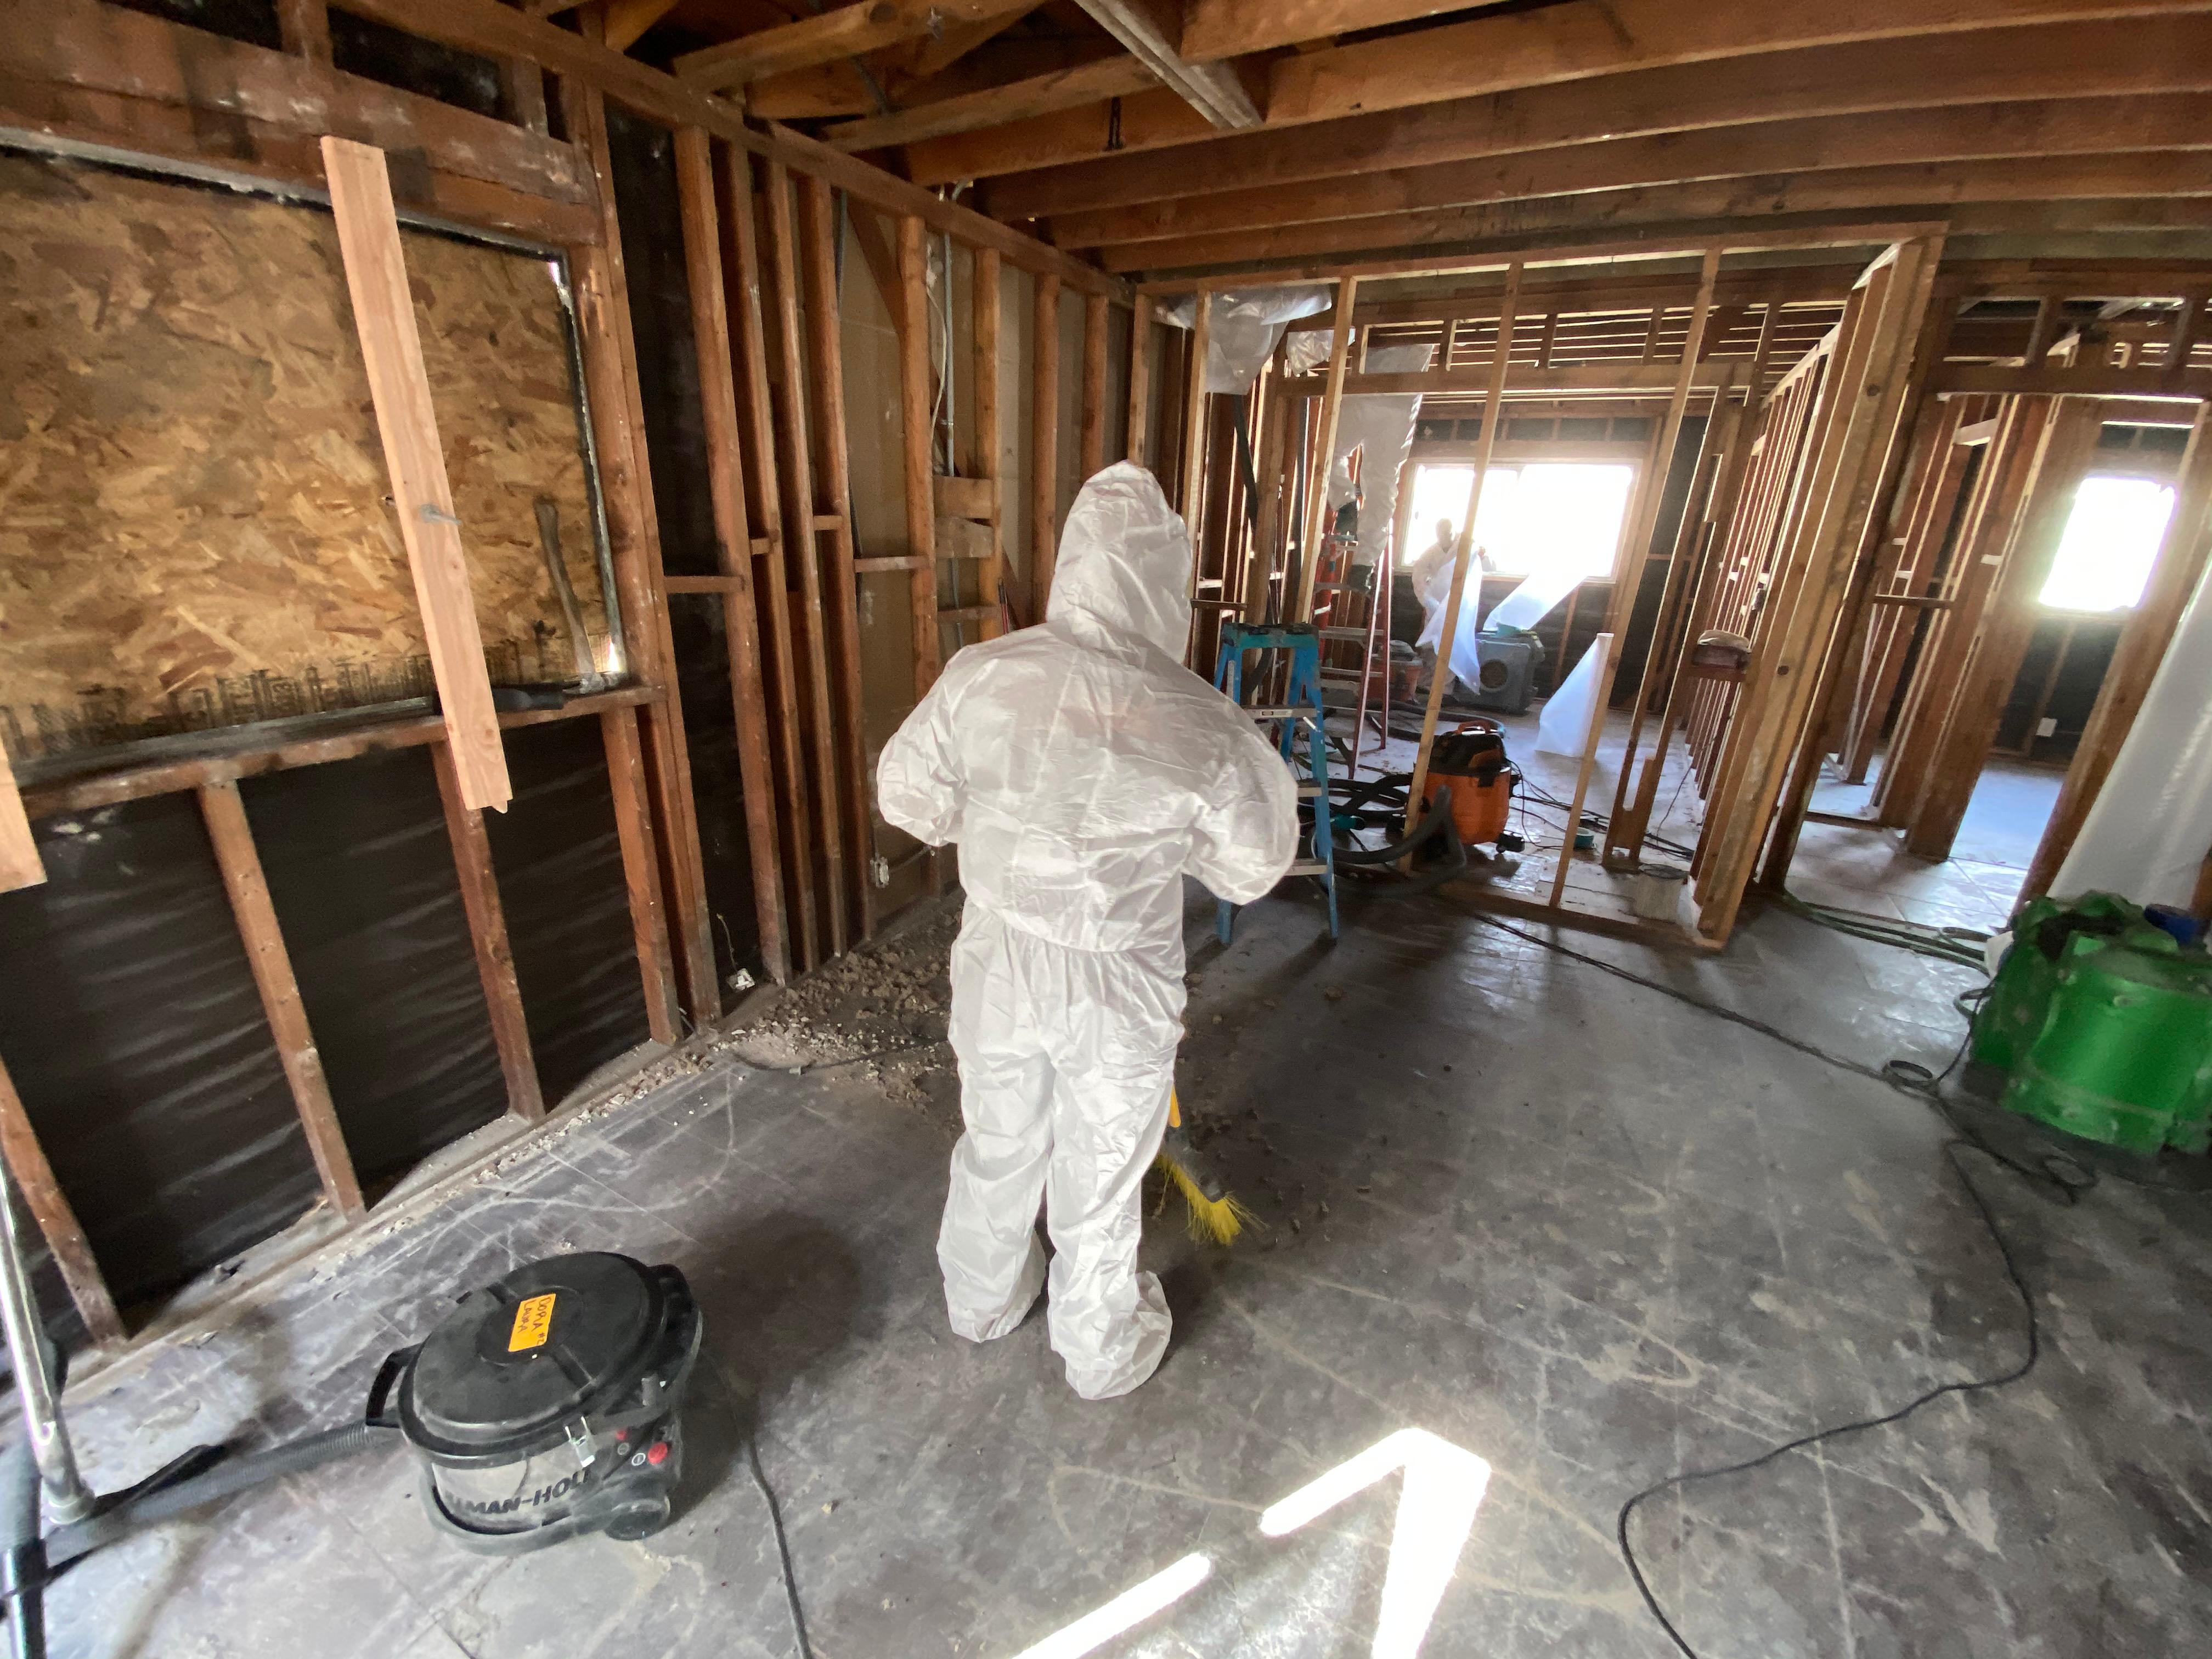 Our SERVPRO of Laguna Beach / Dana Point is working hard on a residential fire cleanup and restoration job!